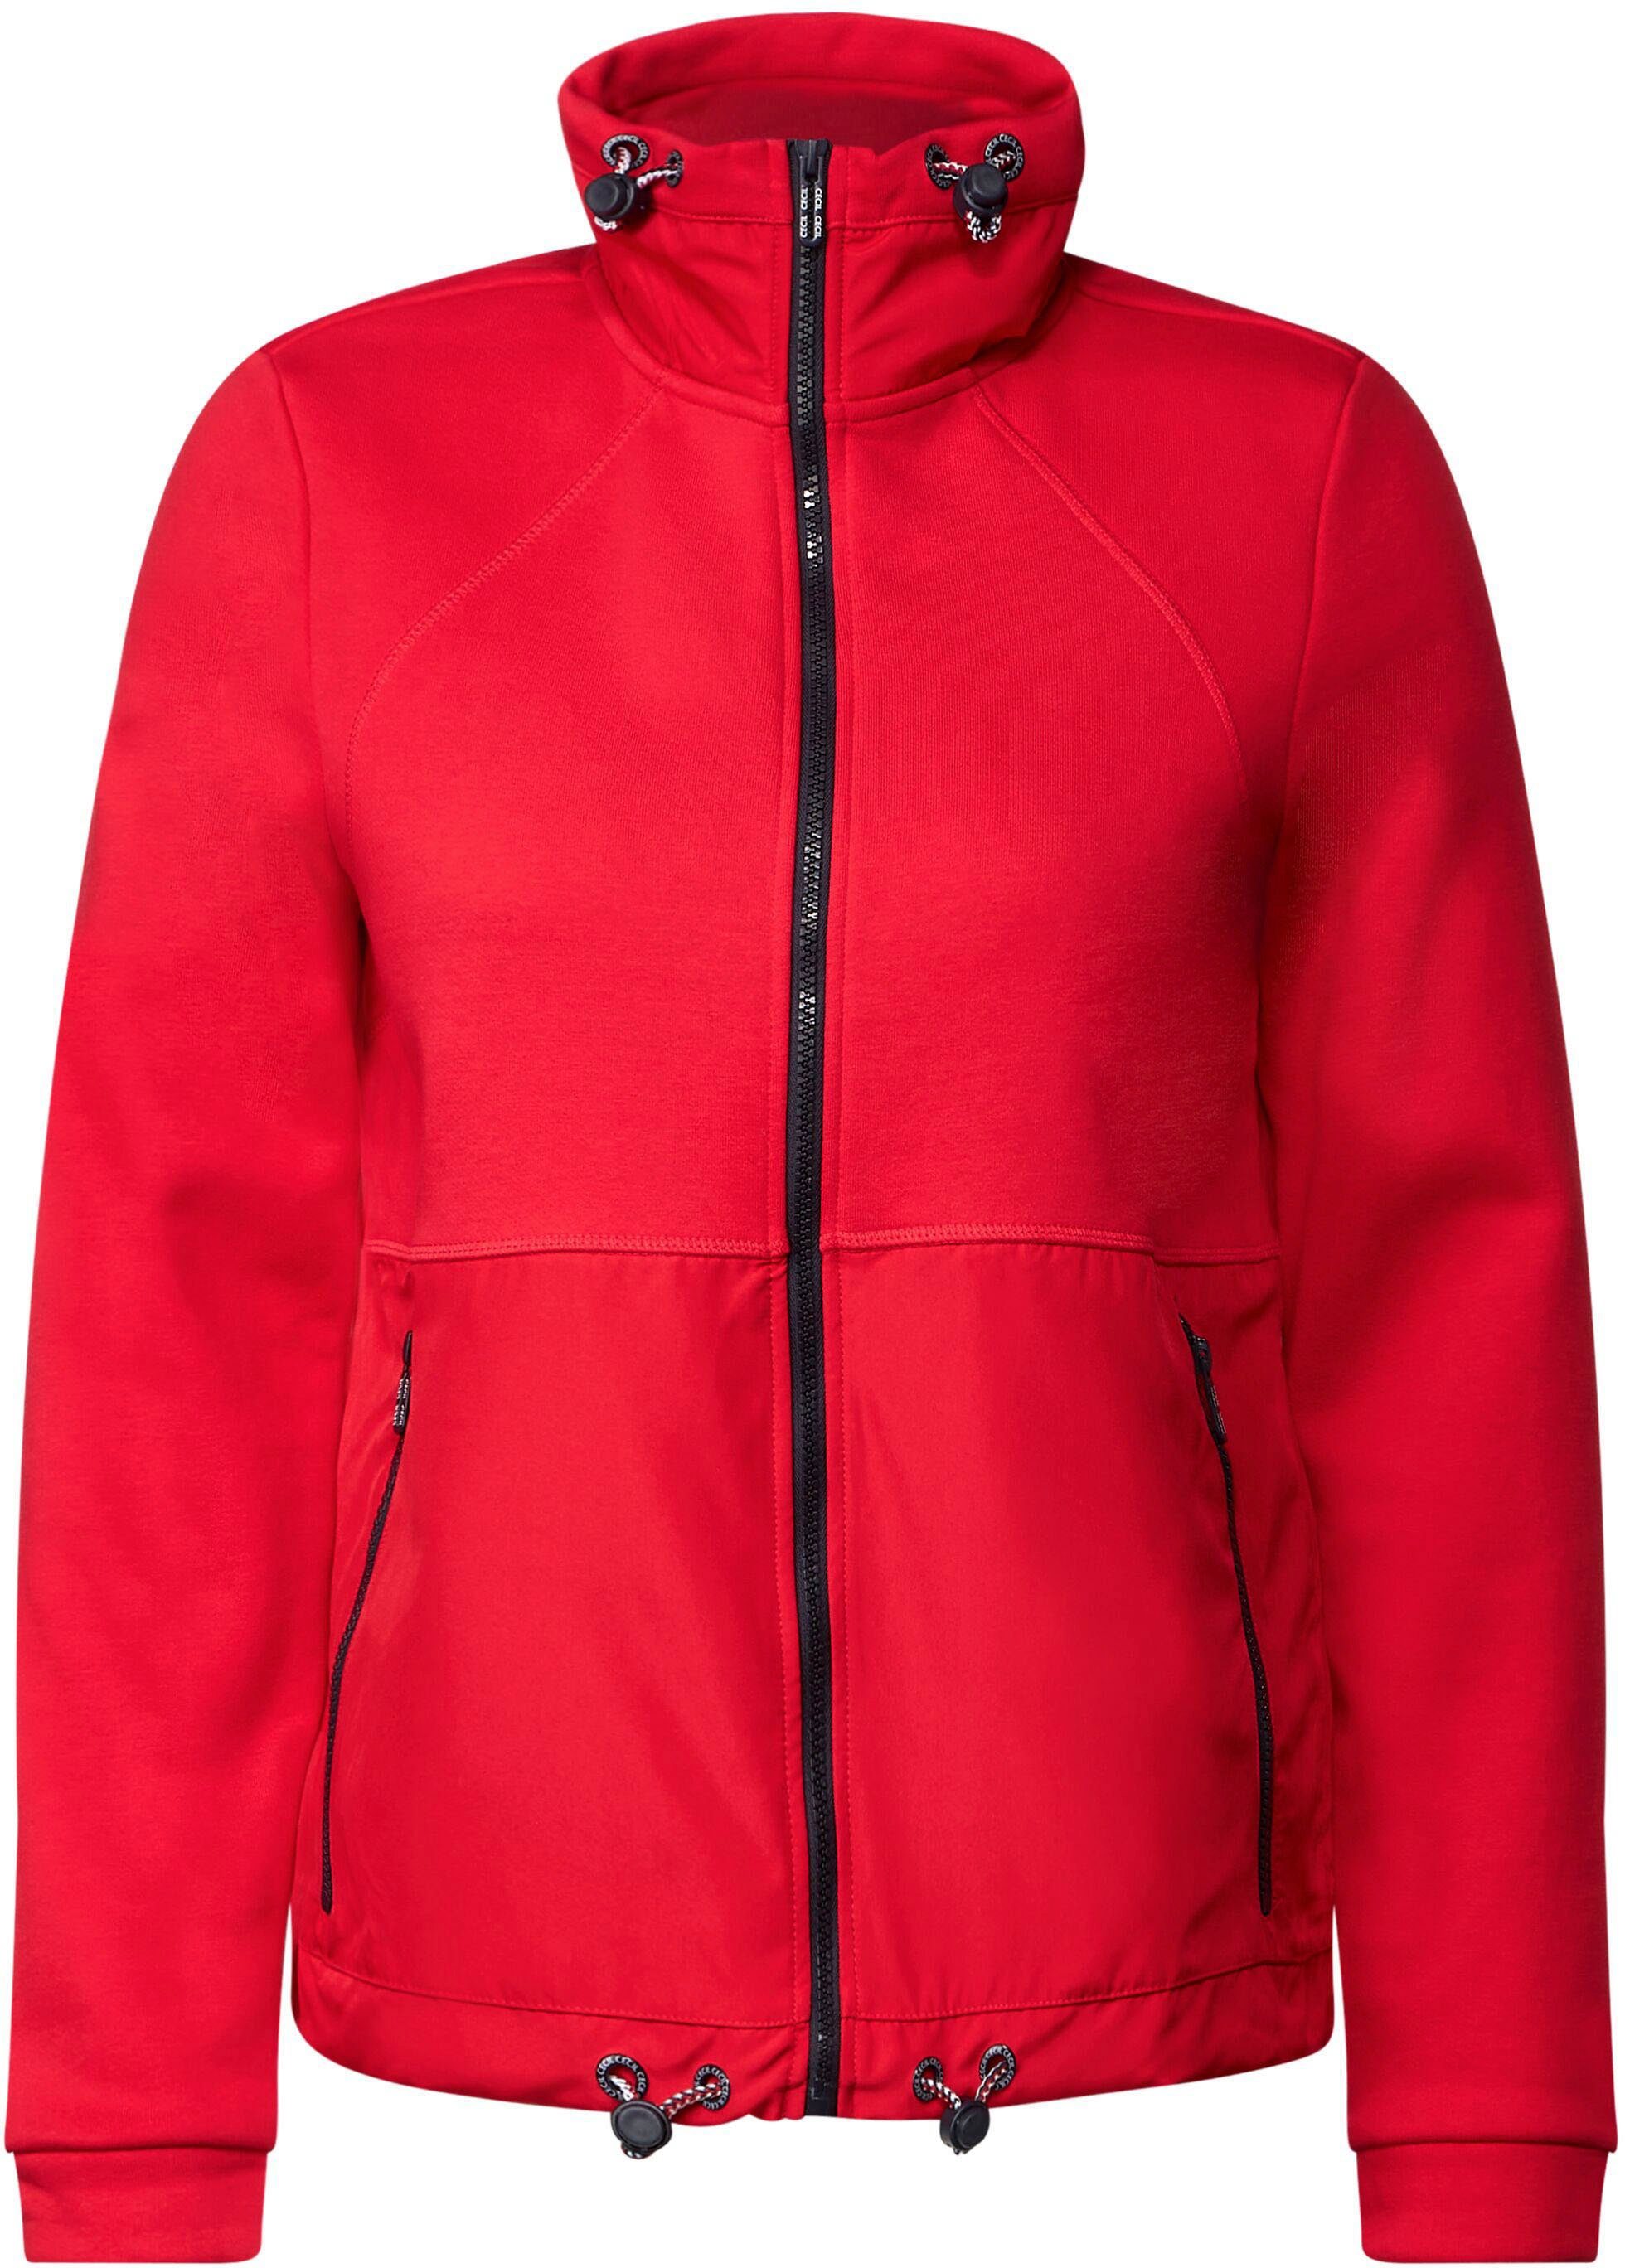 red strong im Materialmix modernen Sweatjacke Cecil